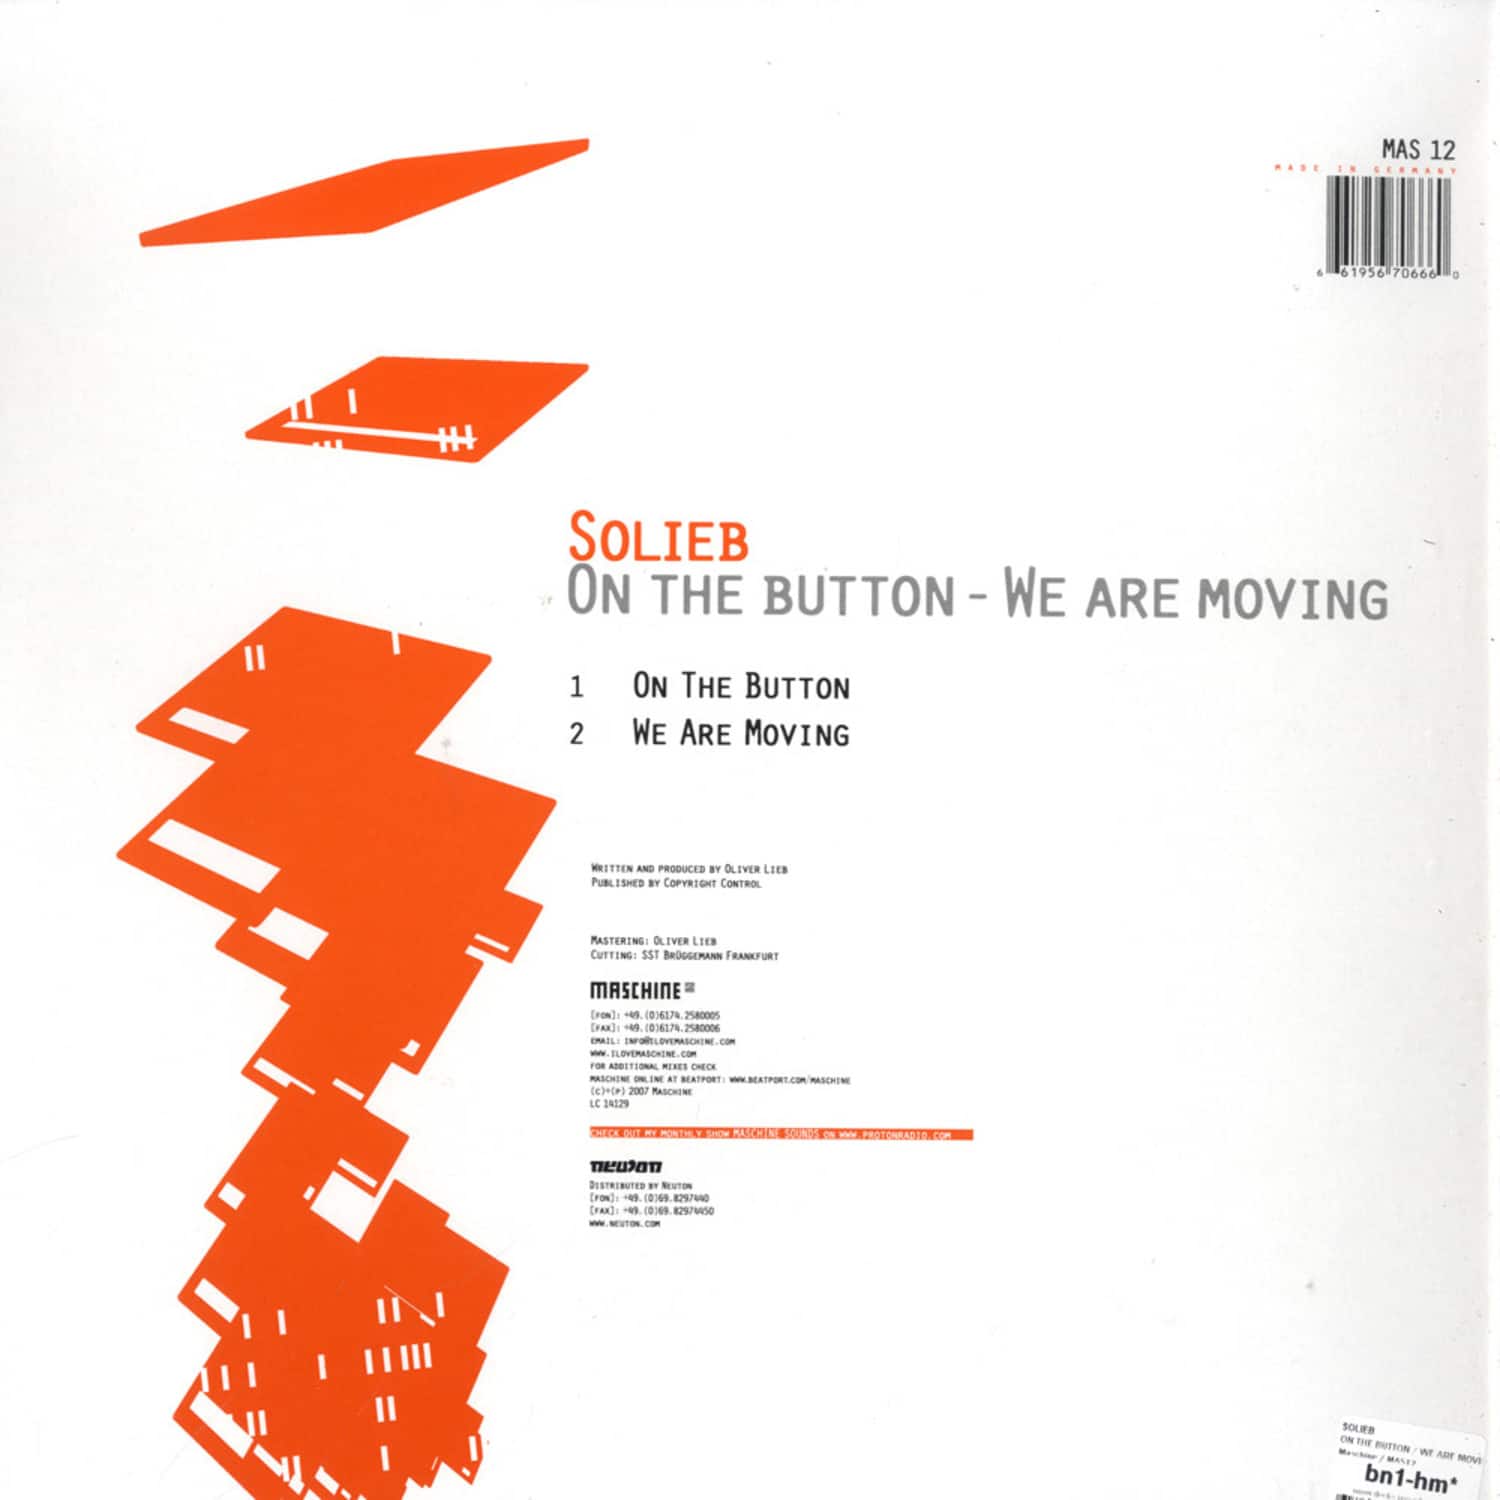 Solieb - ON THE BUTTON / WE ARE MOVING